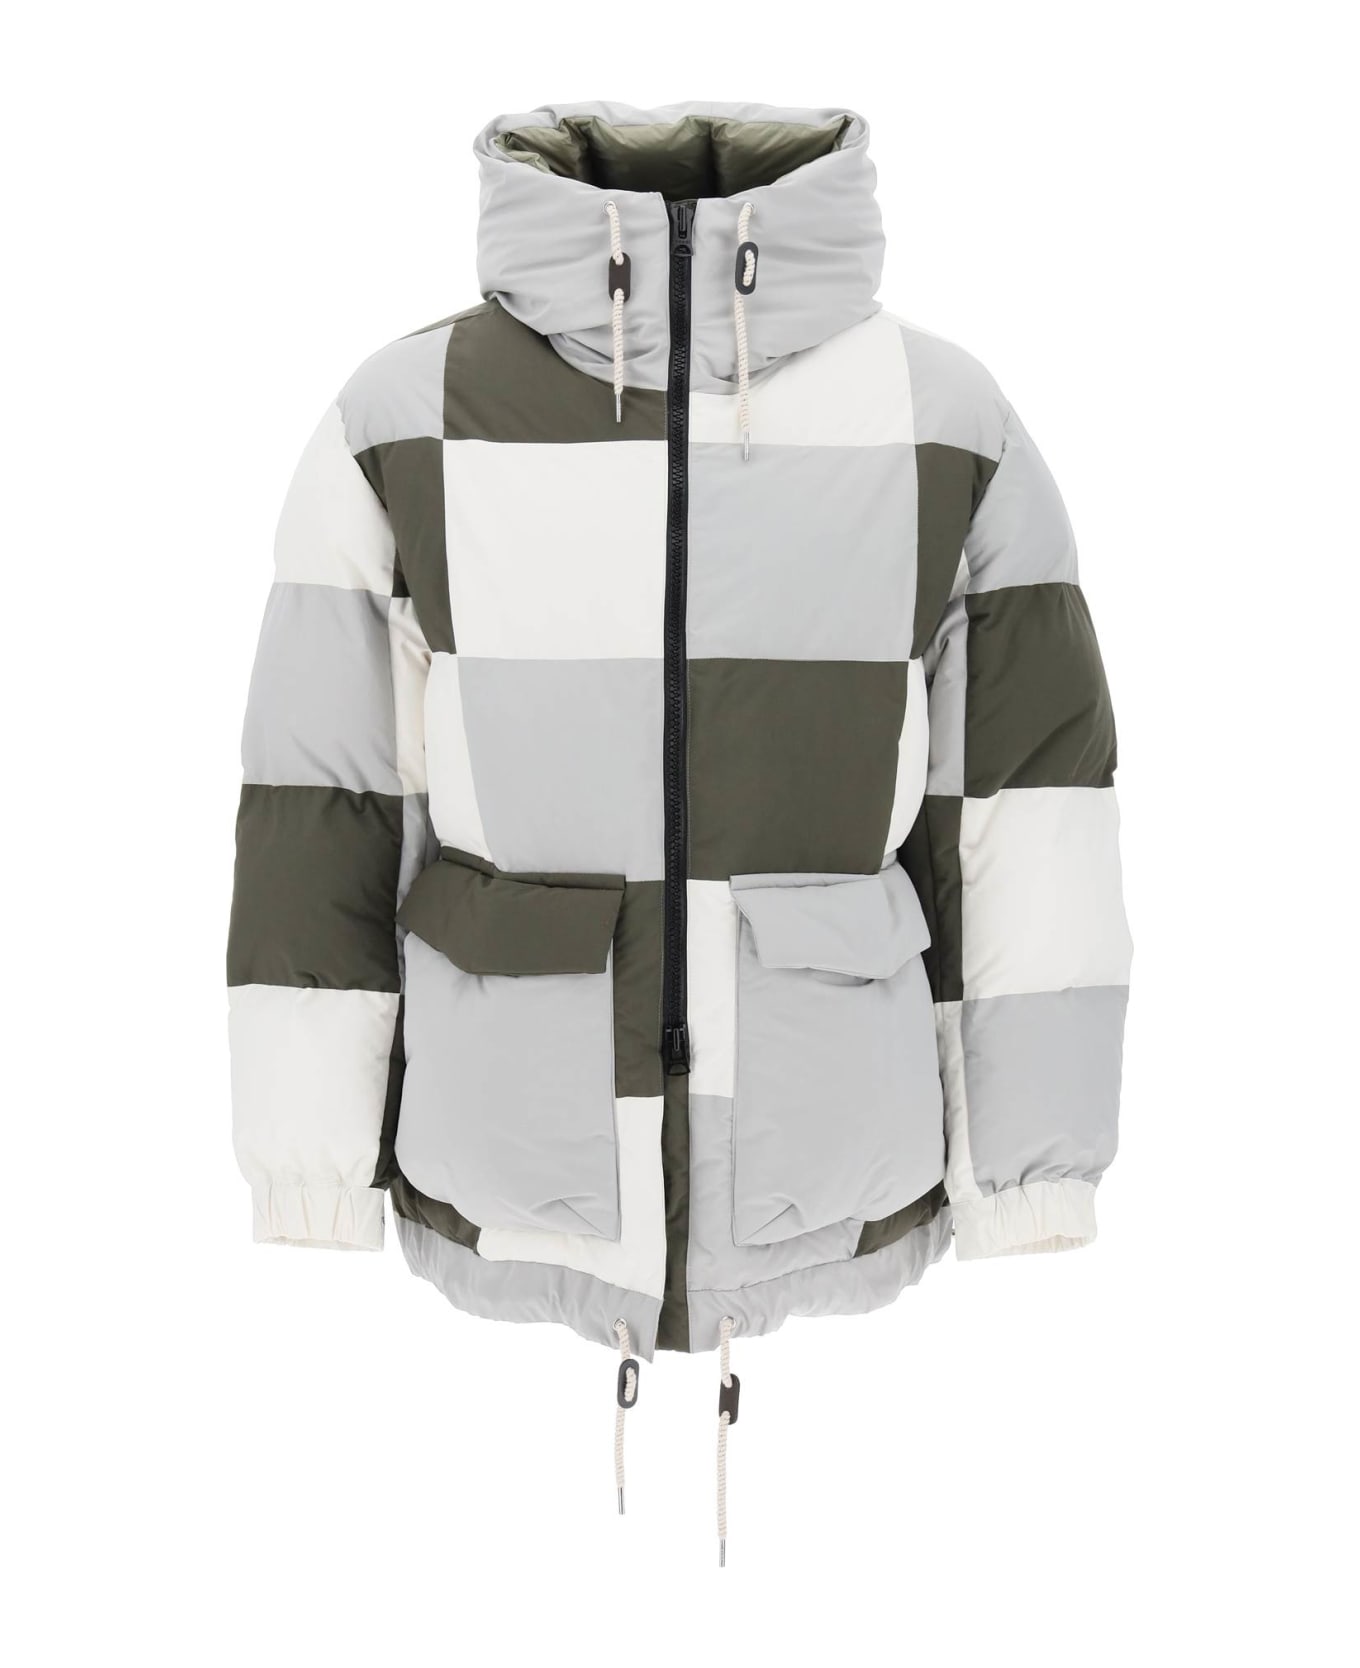 Sacai Hooded Puffer Jacket With Checkerboard Pattern - GRAY MULTI (White)